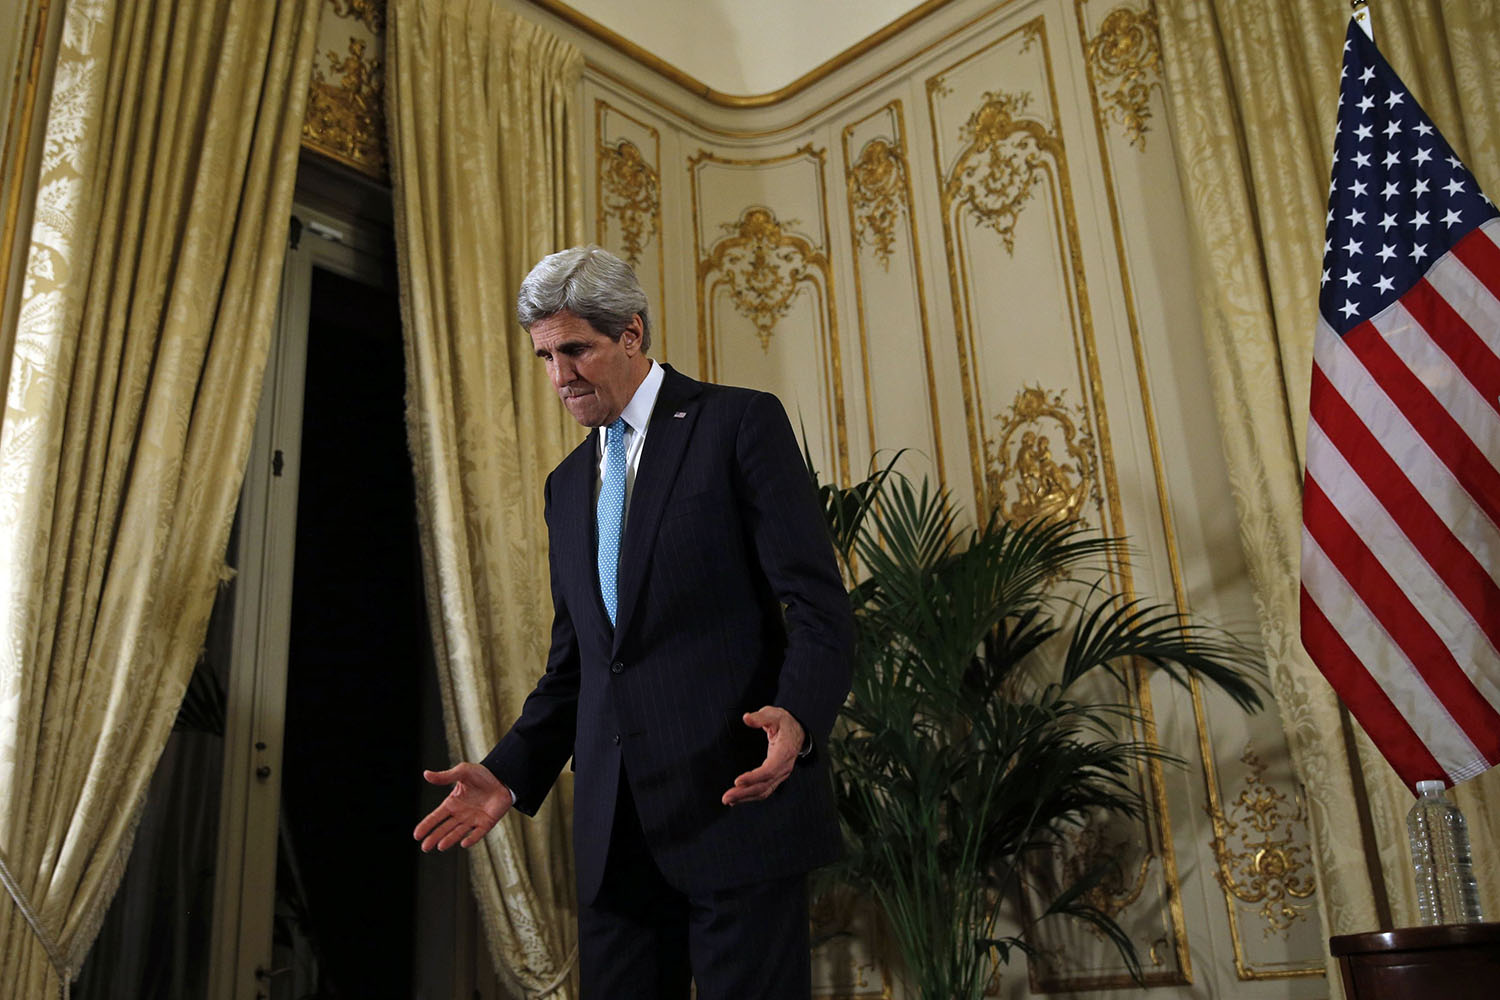 Mar. 5, 2014. U.S. Secretary of State John Kerry departs after speaking to reporters about the Ukraine crisis following his meetings with other foreign ministers in Paris.